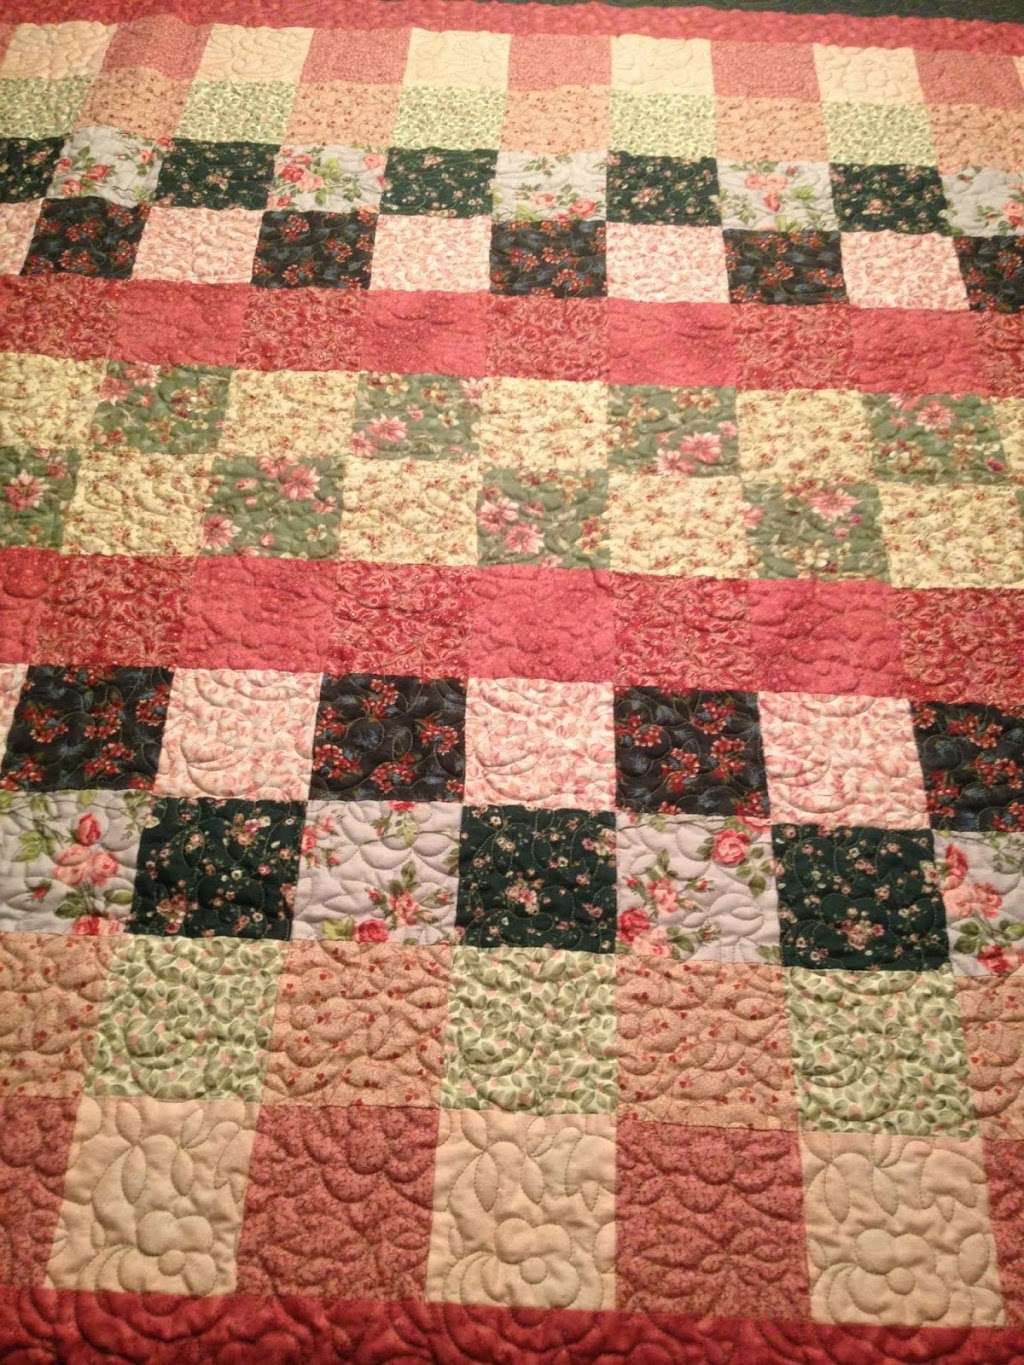 Quilt Me A Story Quilting Services | 19711 Wood Walk Ln, Humble, TX 77346 | Phone: (832) 527-4107